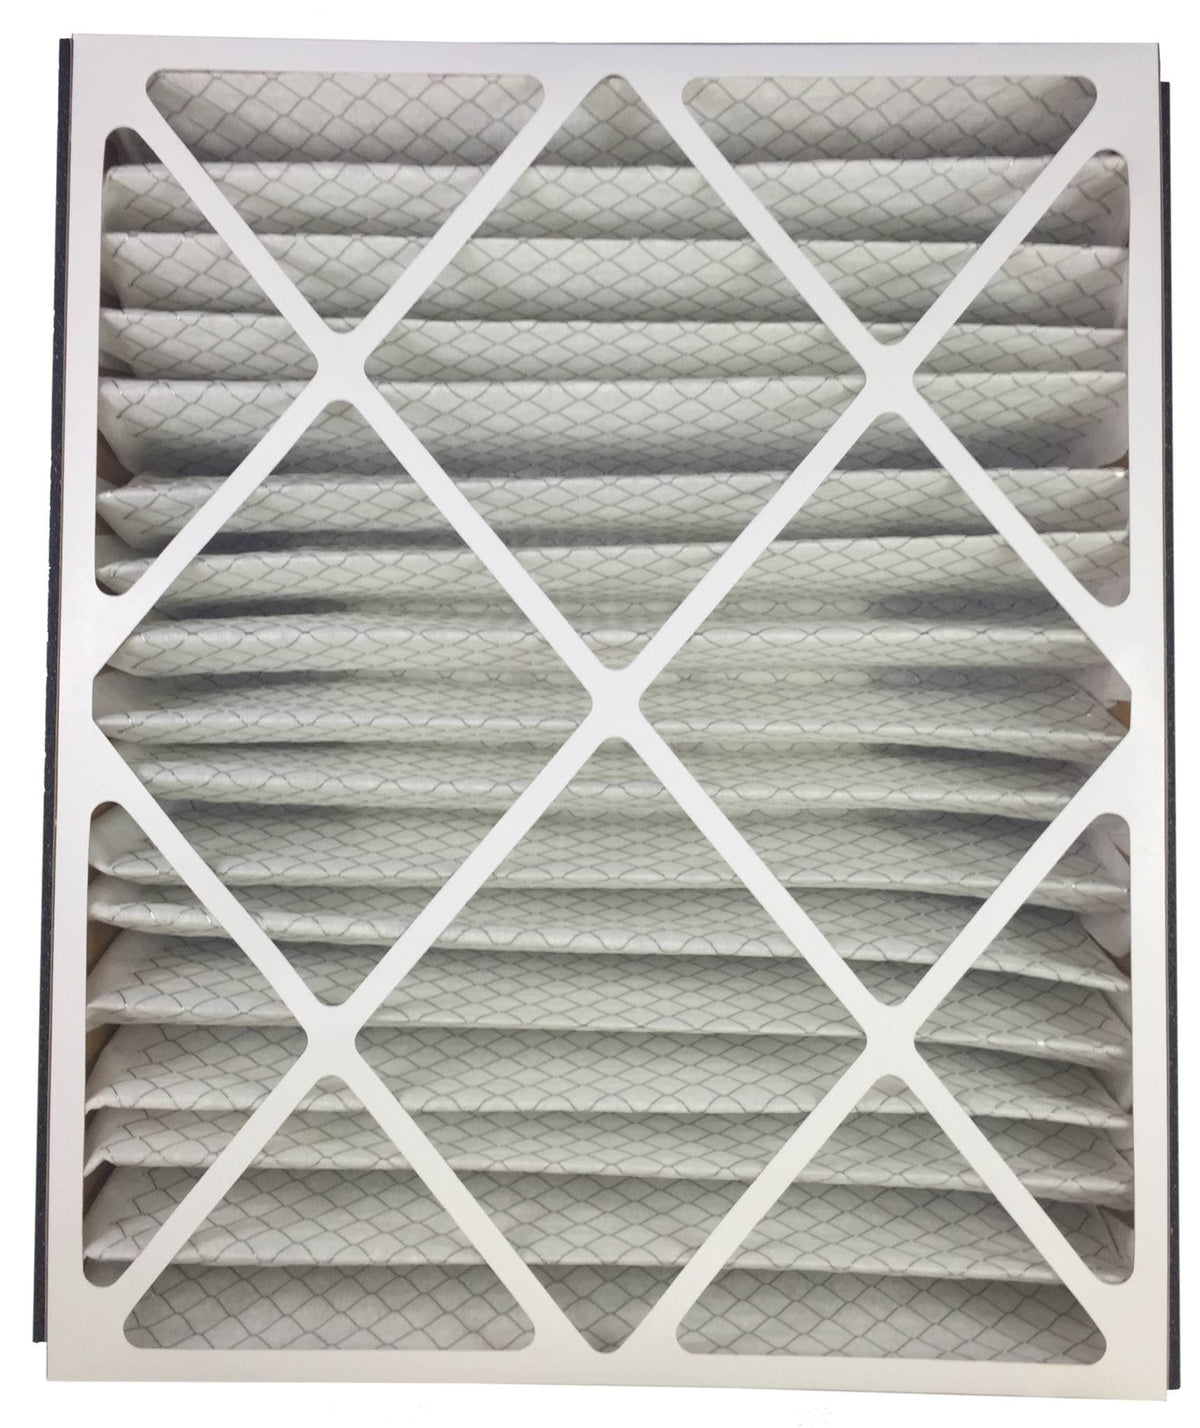 Atomic 255649-102 Trion Air Bear MERV 8 Compatible Replacement Filter - 20x25x5 - 2 Pack